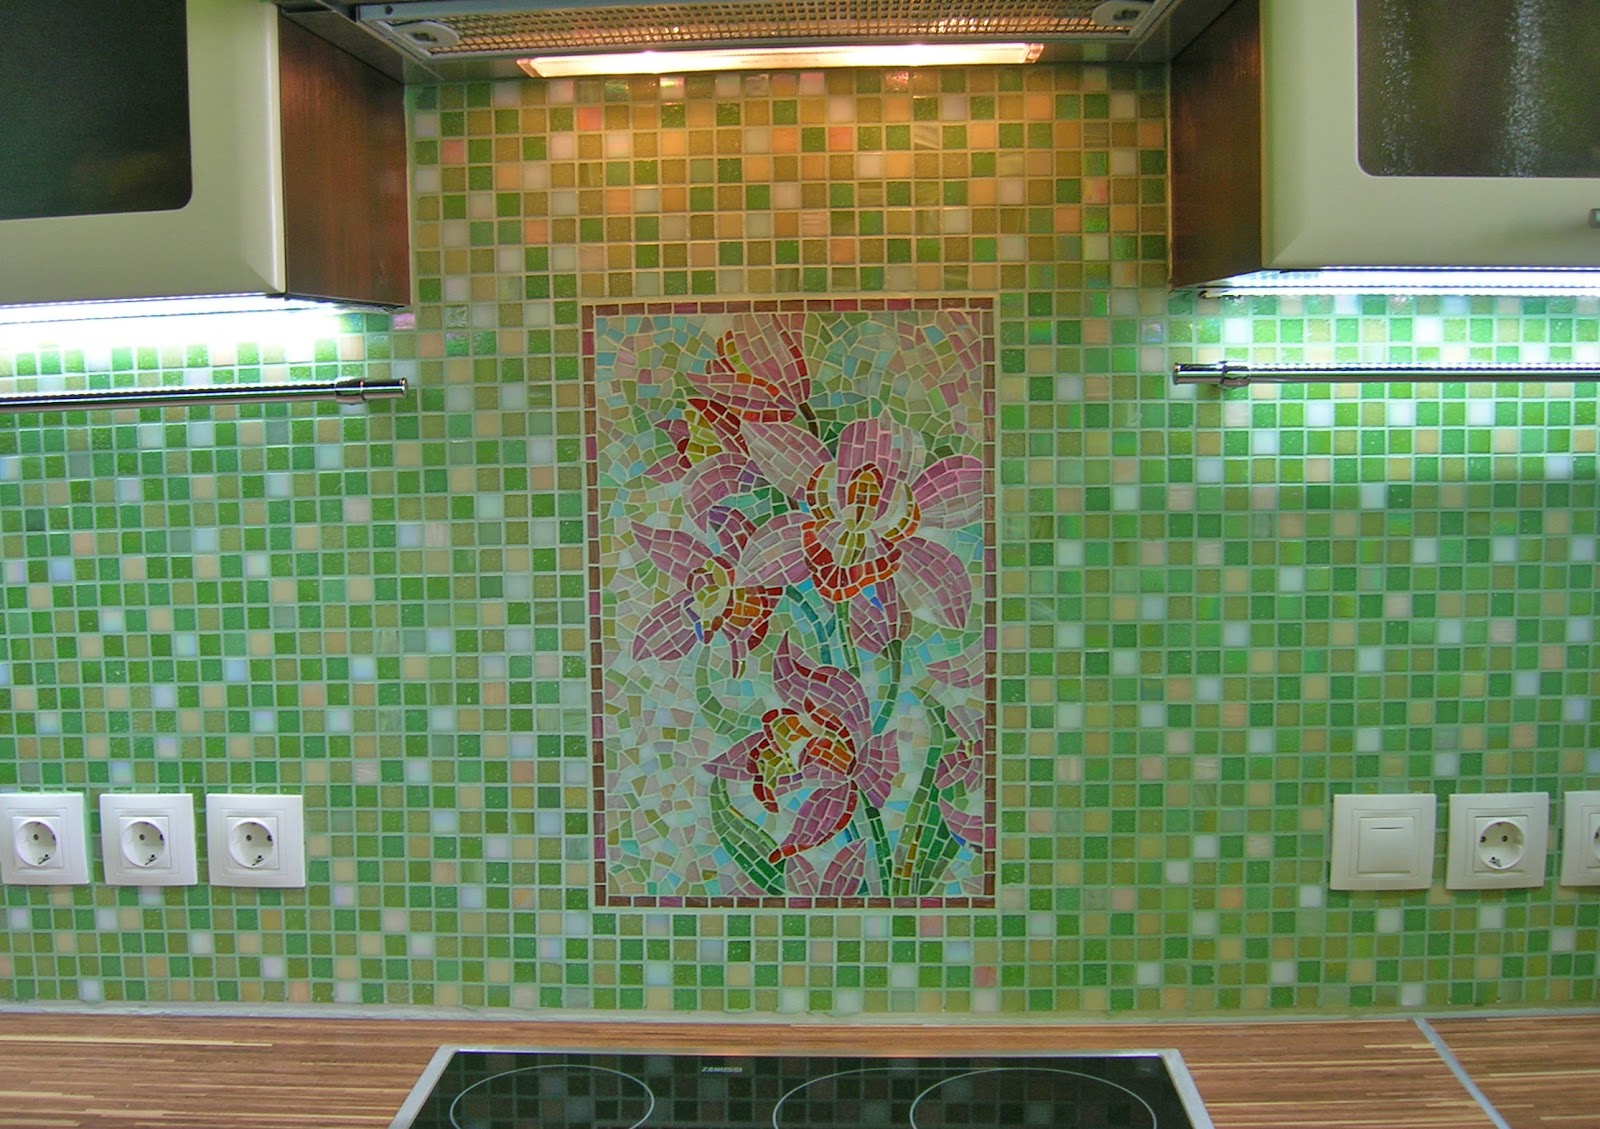 bright apron from a tile of a standard format with the image in the design of the kitchen